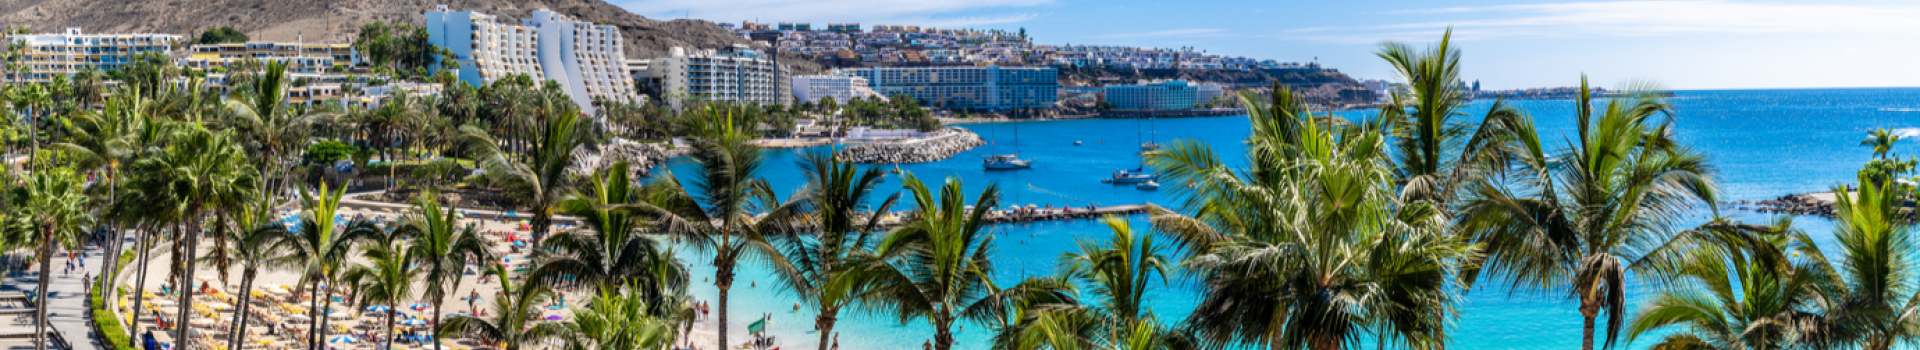 Last minute holidays to Gran Canaria with Cassidy Travel